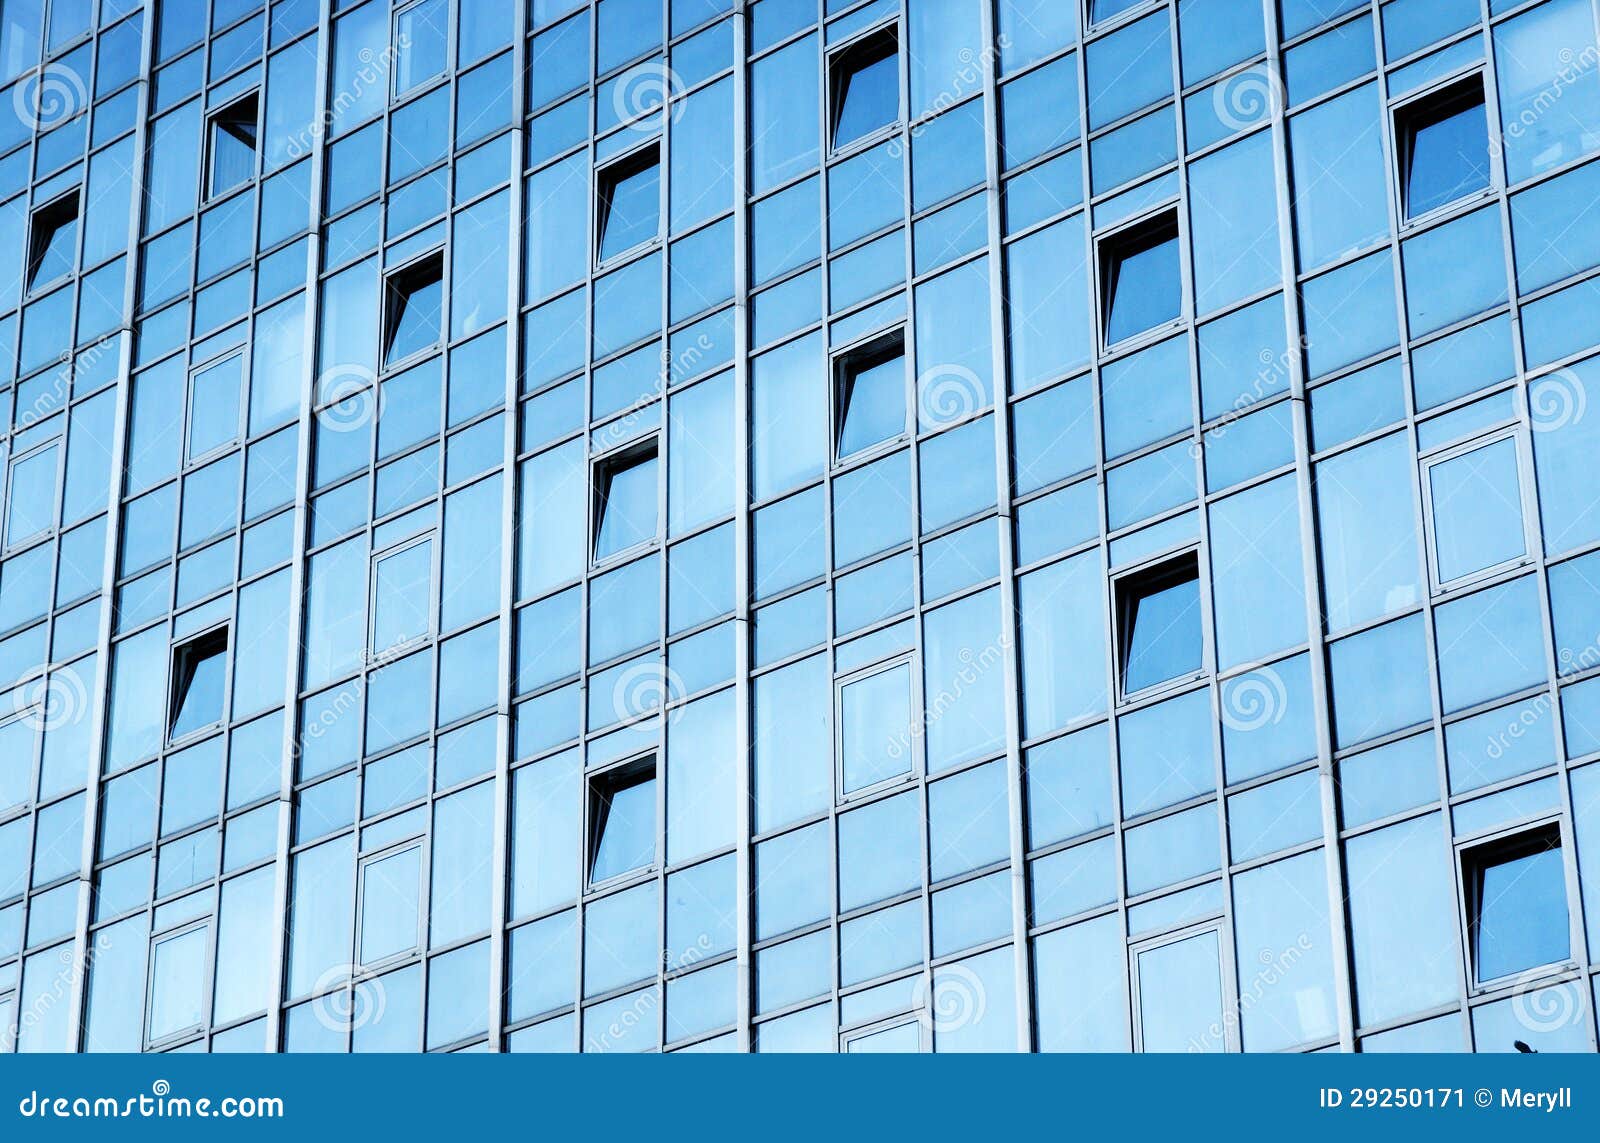 Windows background stock image. Image of corporate, structure - 29250171